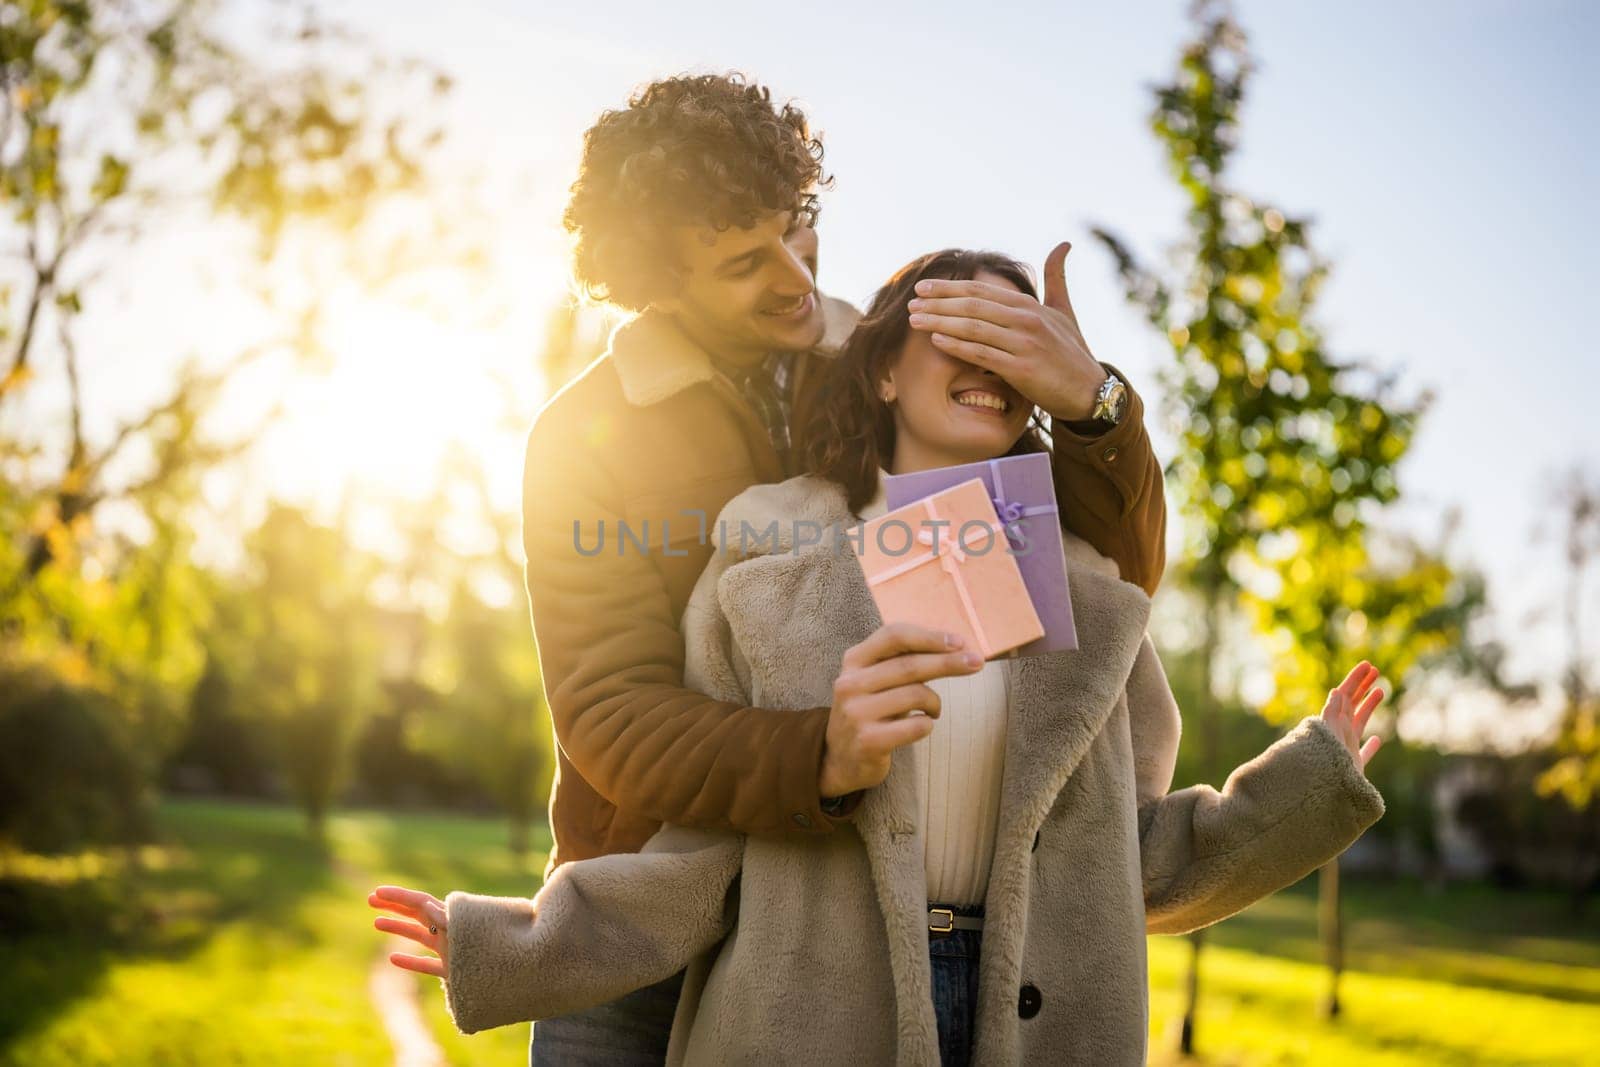 Portrait of happy loving couple in park in sunset. Man is giving present to his woman.